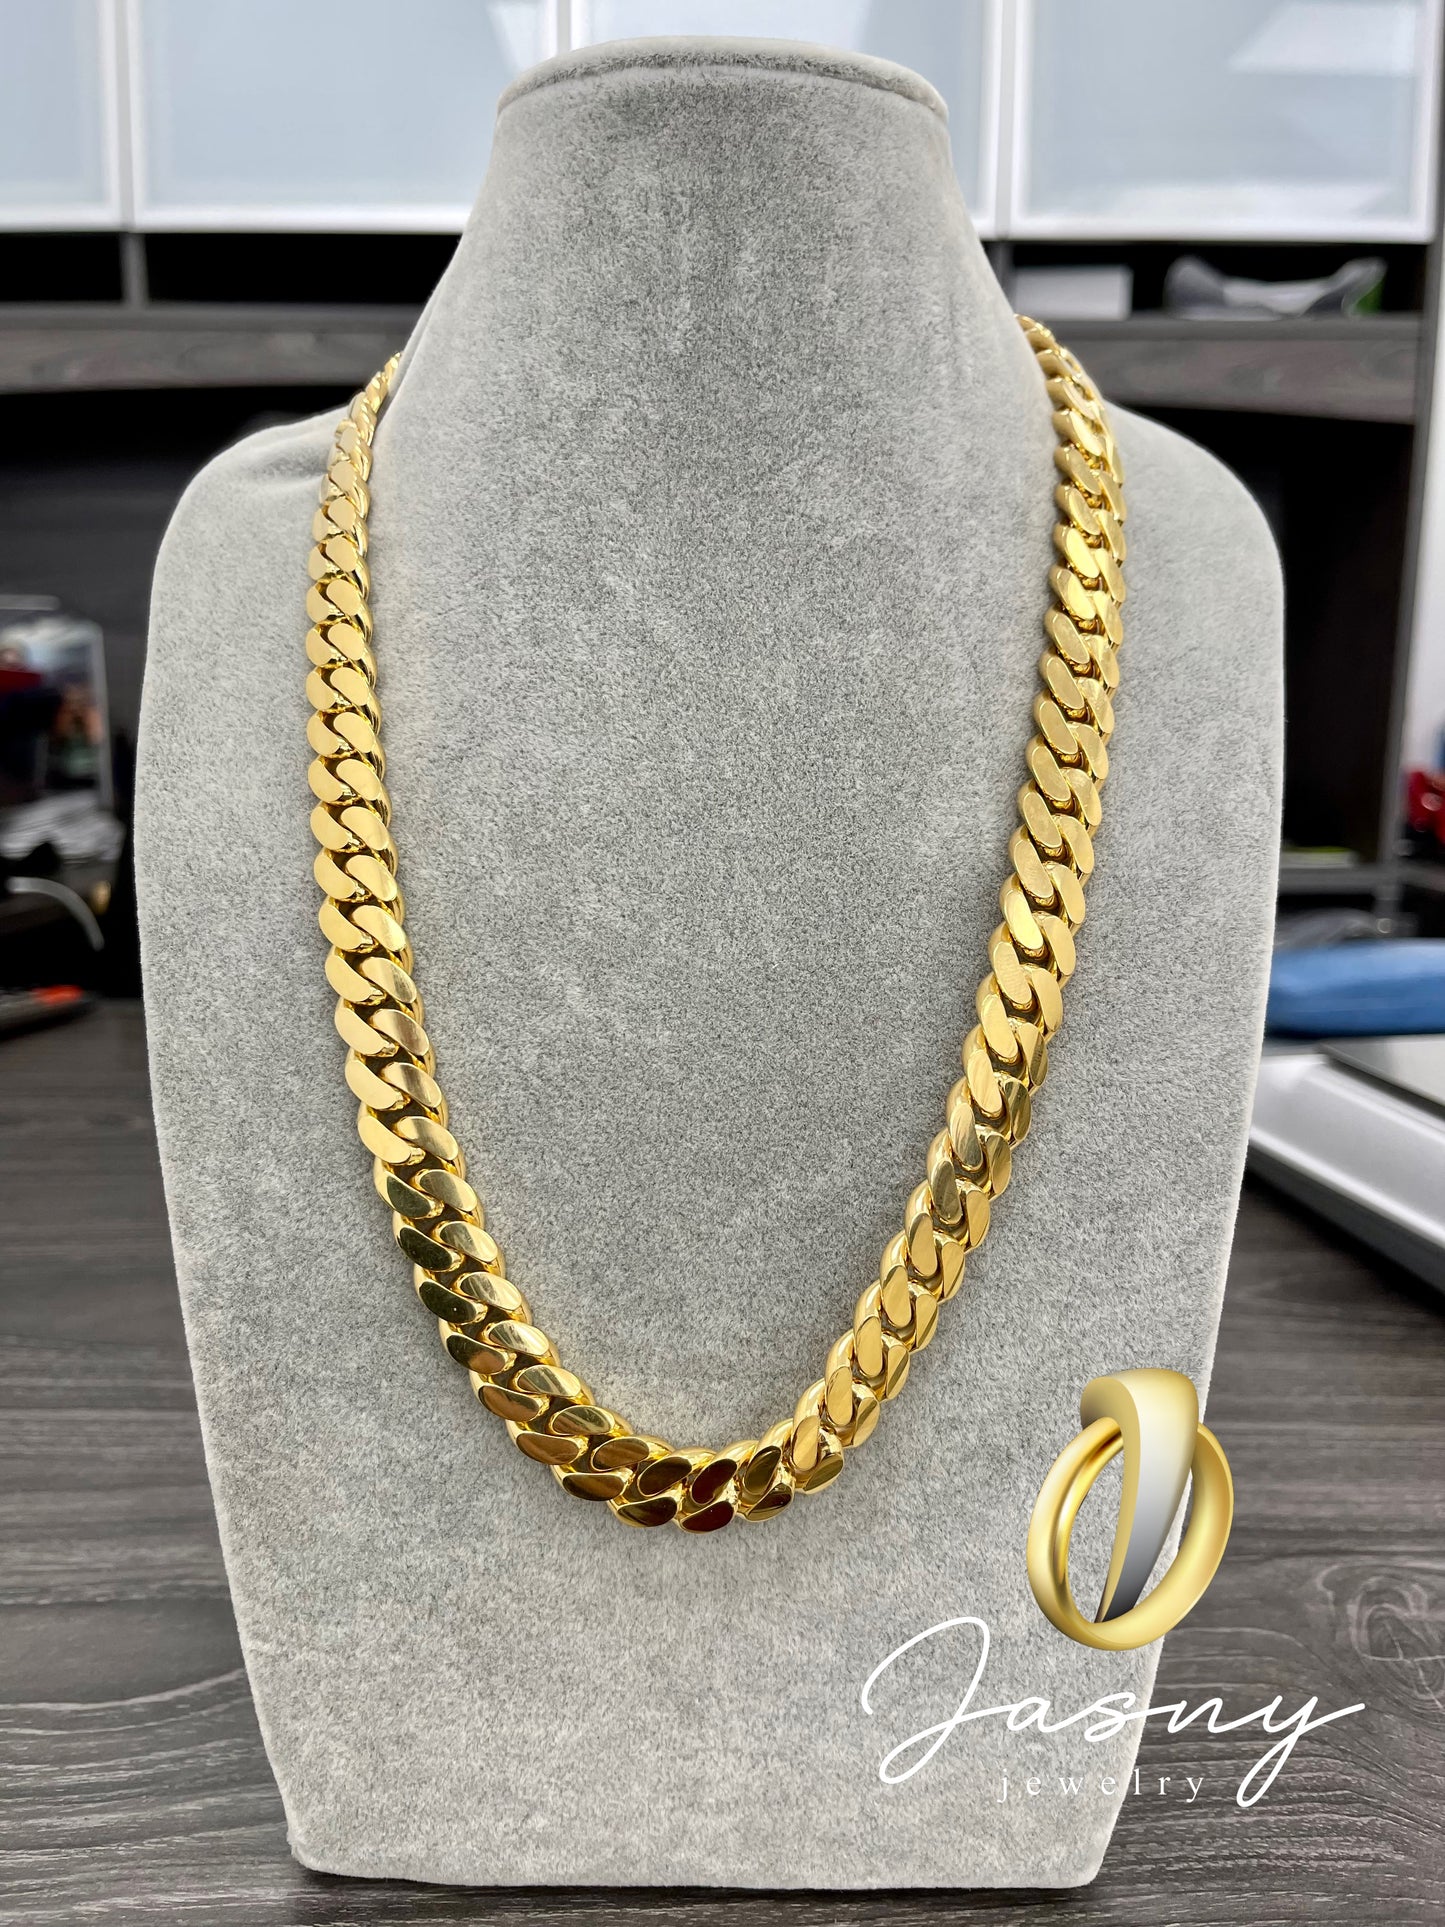 💎🏅 CHAIN CUBAN LINK SOLID GOLD 14K